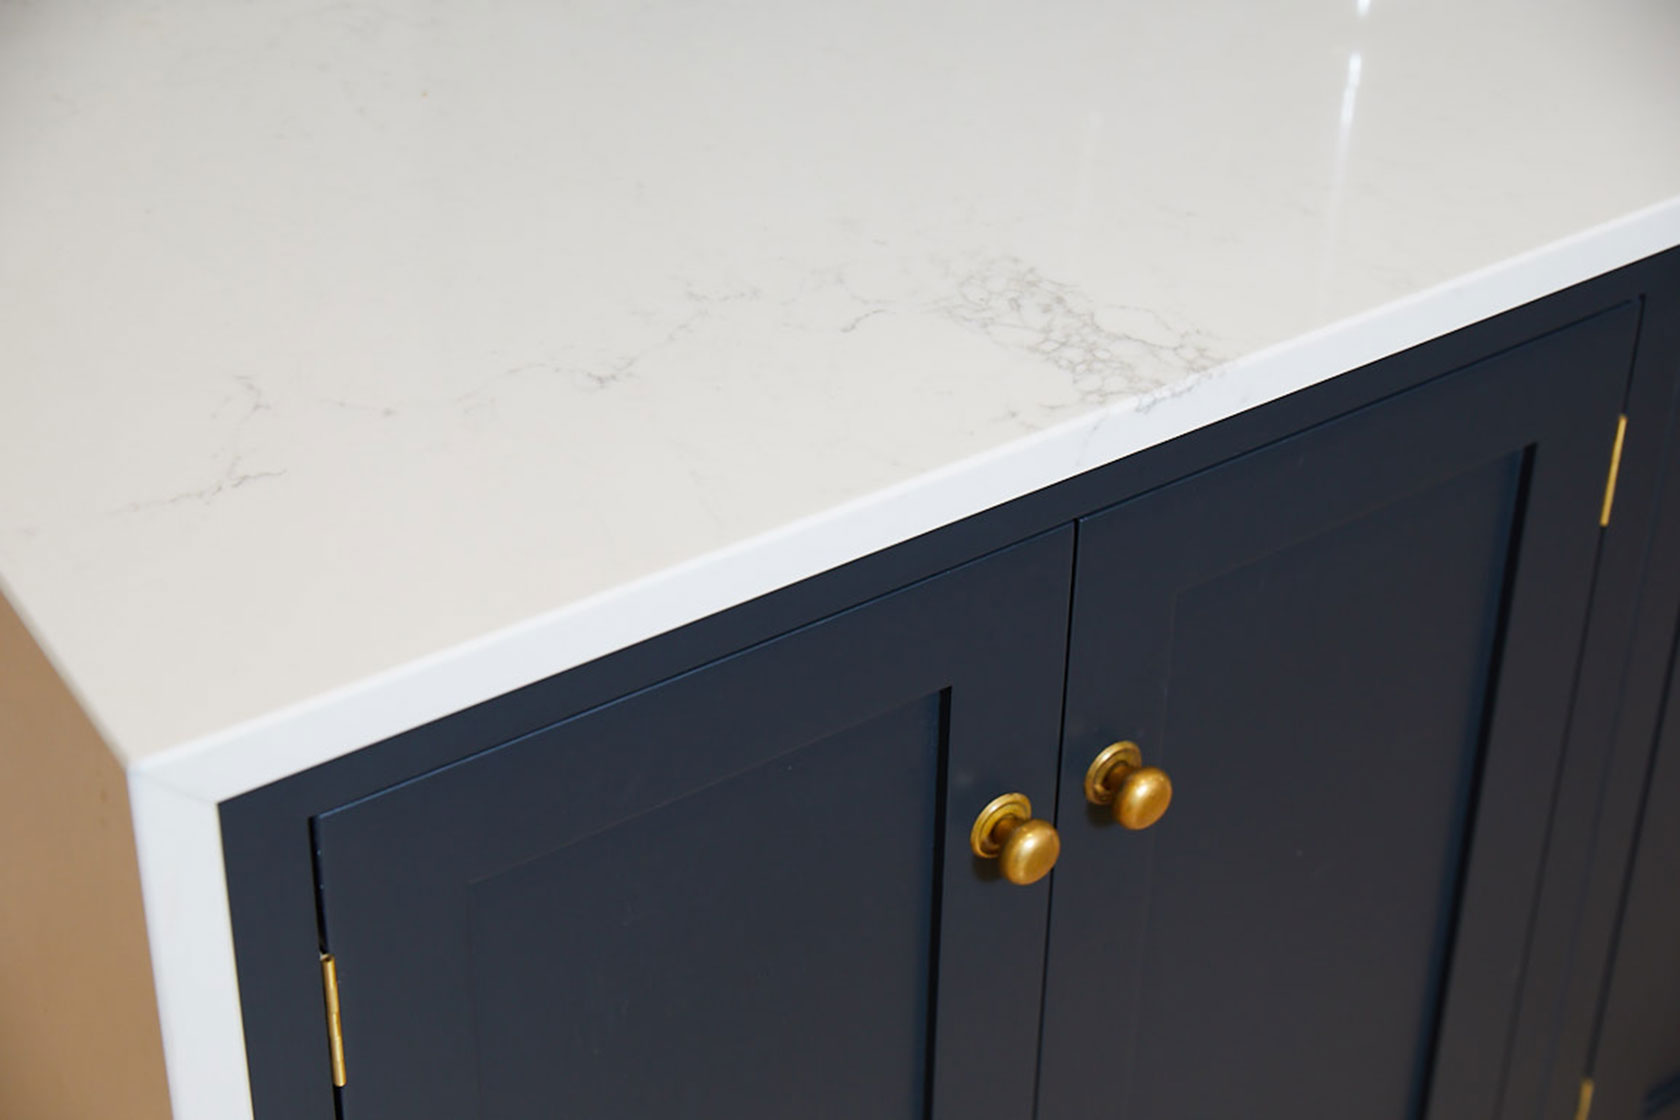 Caesarstone worktop sits on bespoke shaker cabinets with burnt brass knobs